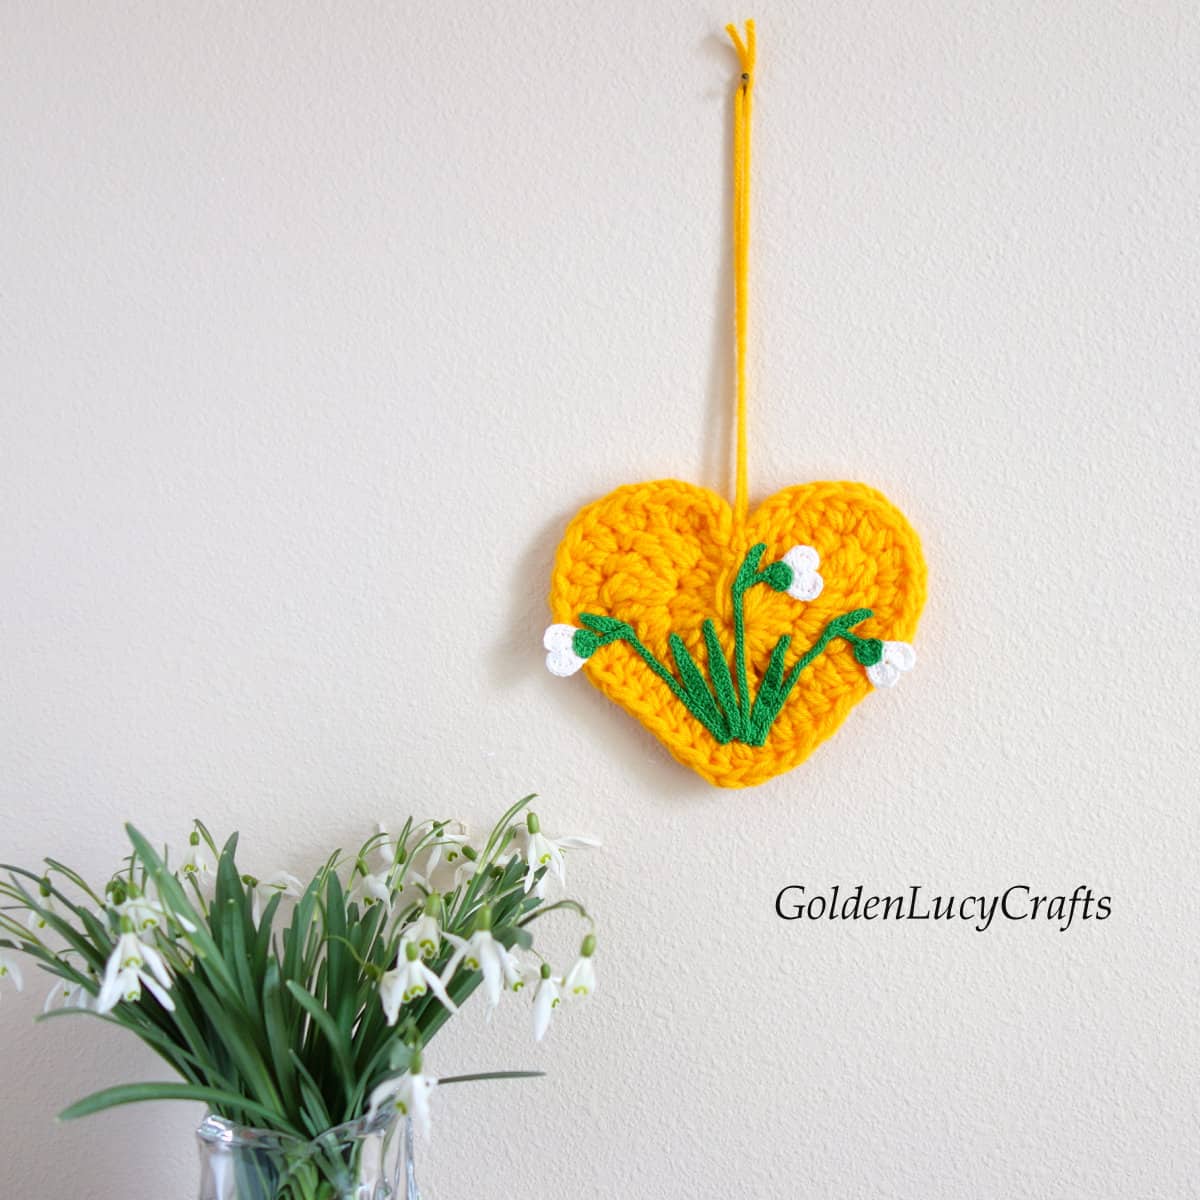 Crocheted yellow heart with crocheted snowdrops on it wall decor, real snowdrops in a vase.